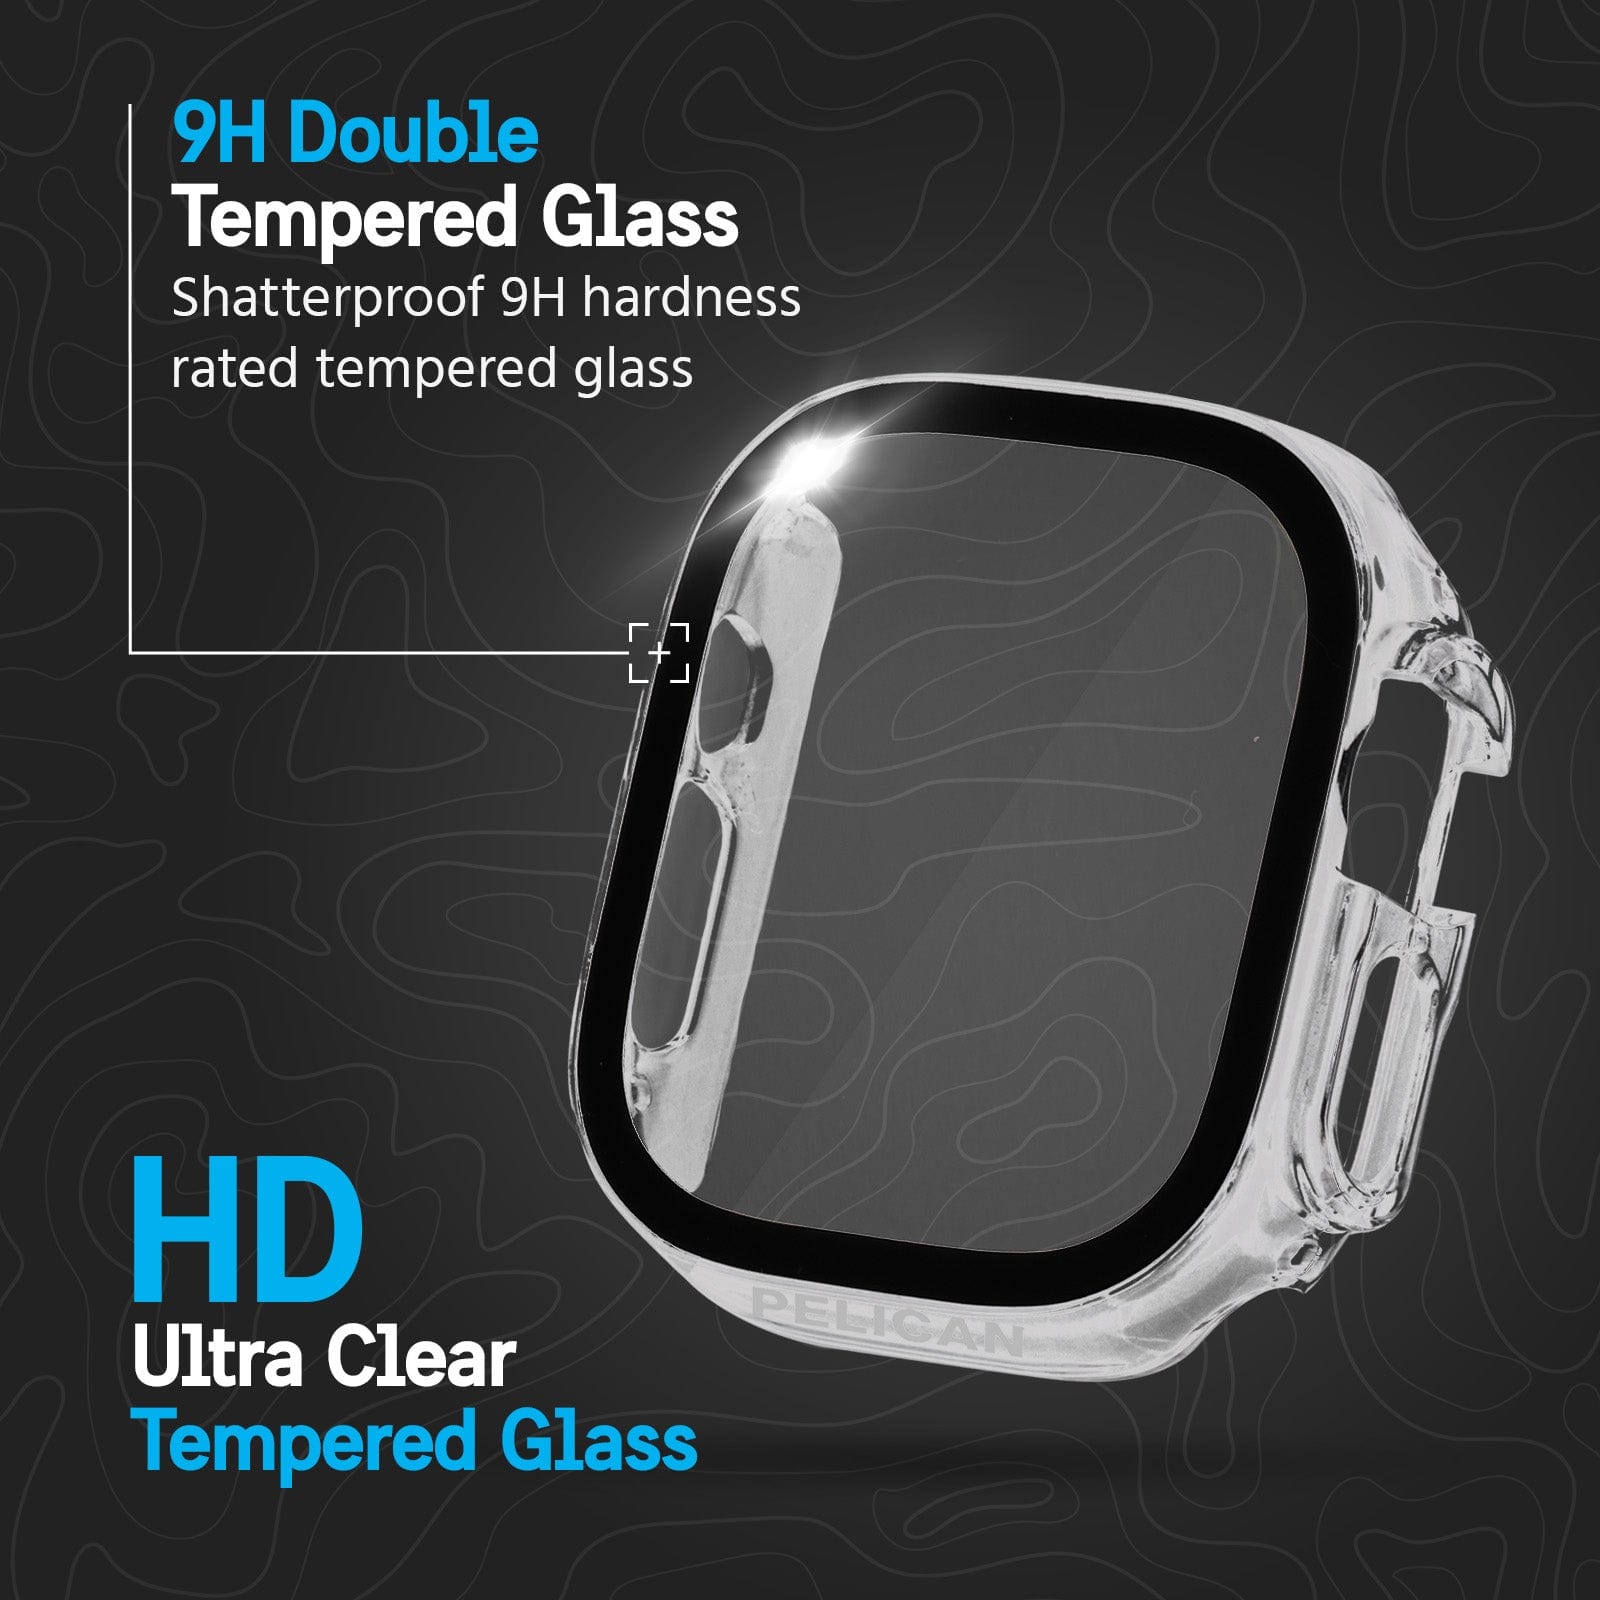 9H double tempered glass: Shatterproof 9H hardness rated tempered glass. HD Ultra clear tempered glass